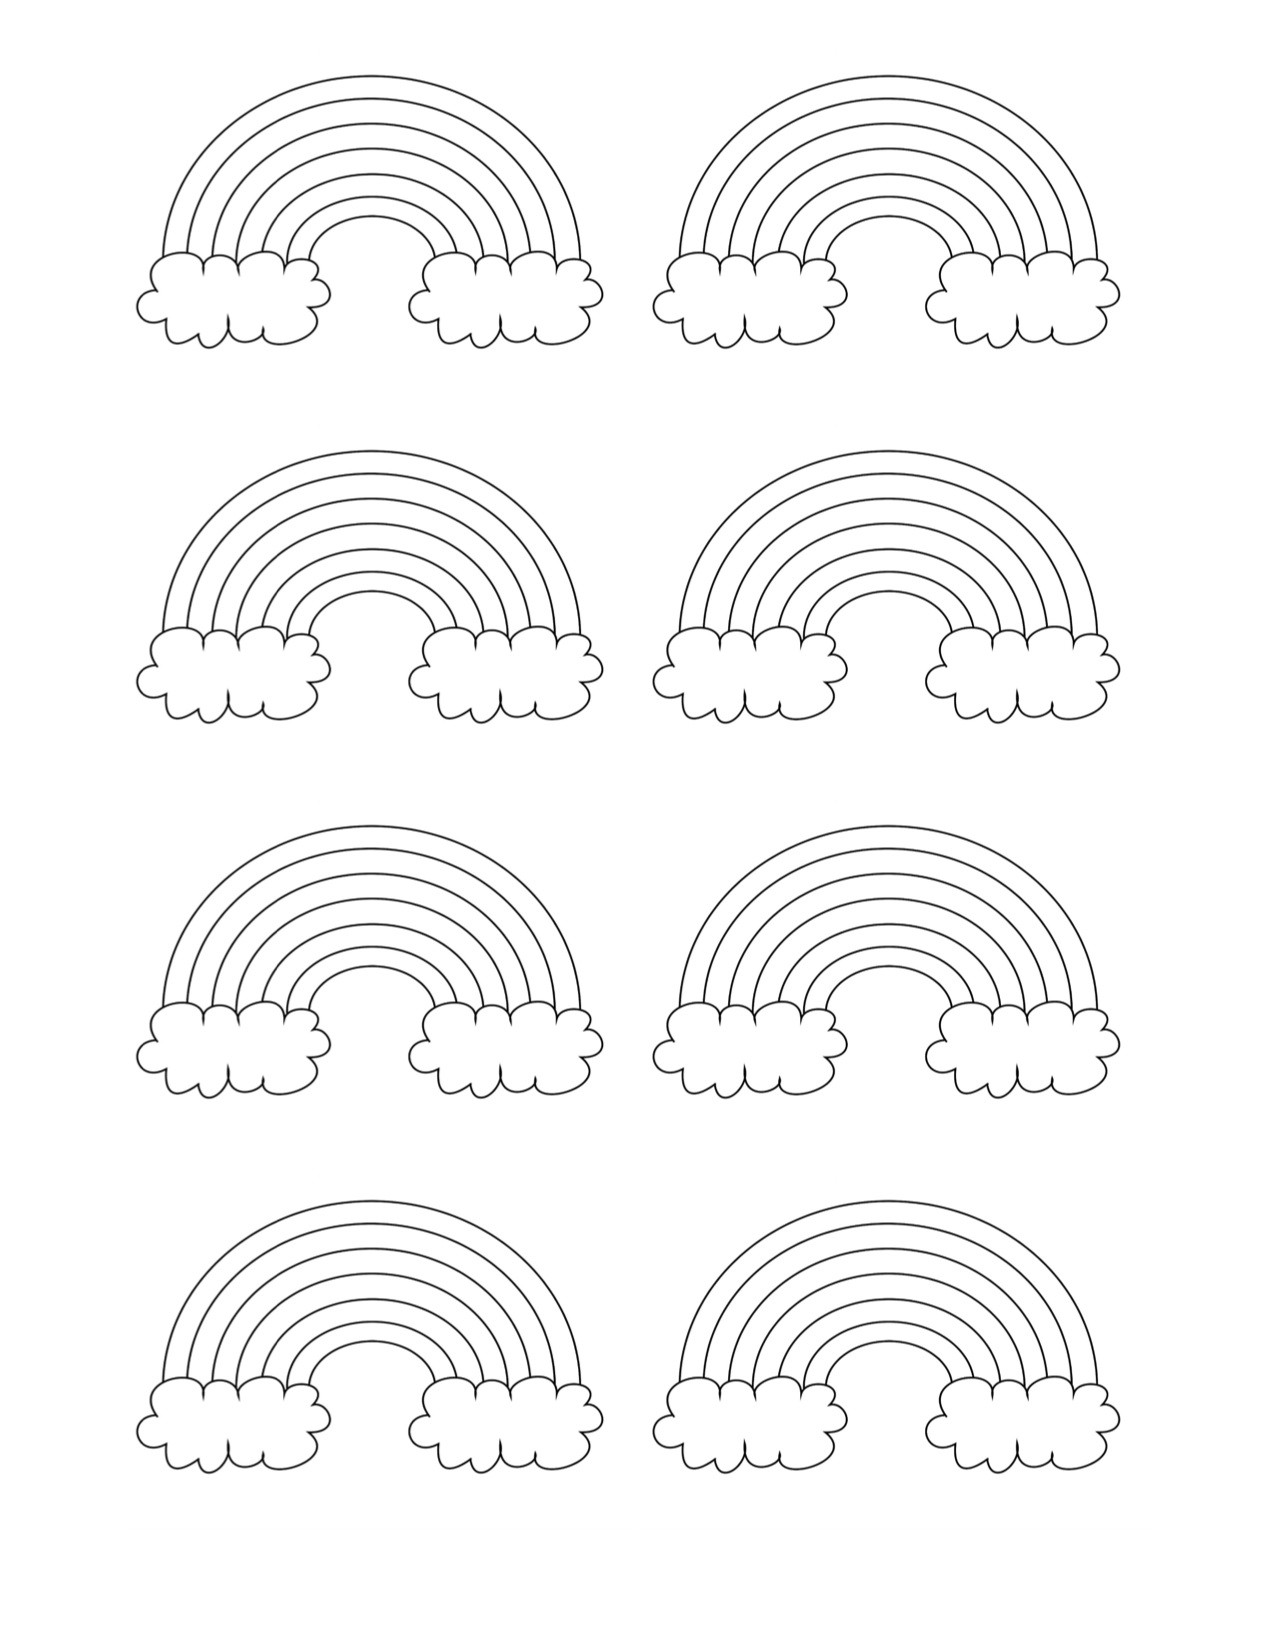 Printable Rainbow Coloring Sheet
 Cute Rainbow Patterns with Clouds Free Template You Can